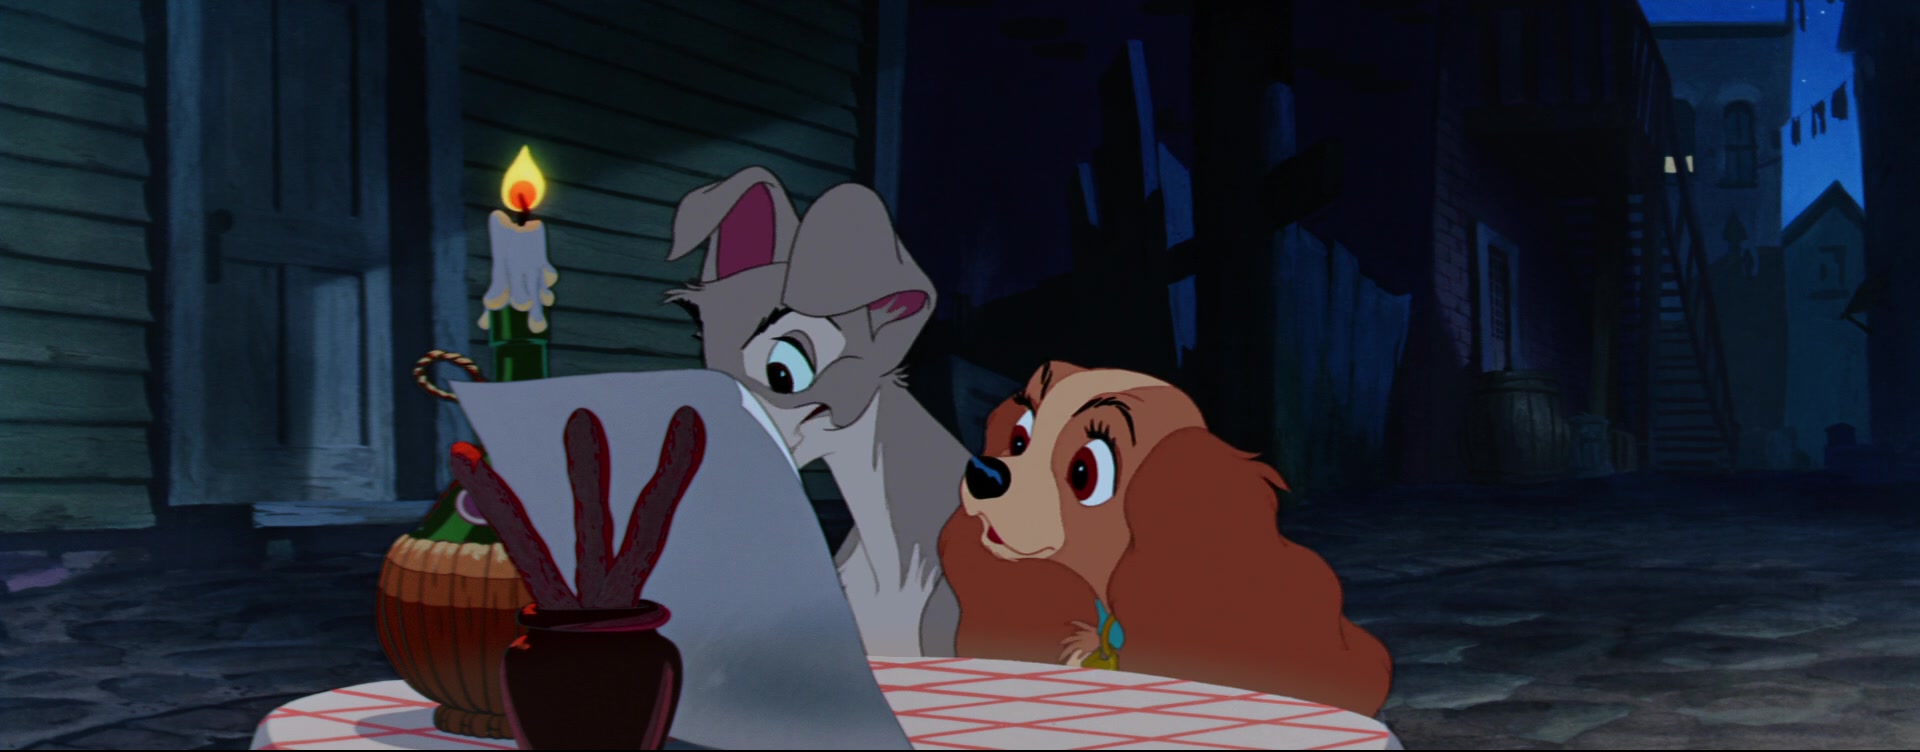 Lady and the Tramp Screencap | Fancaps